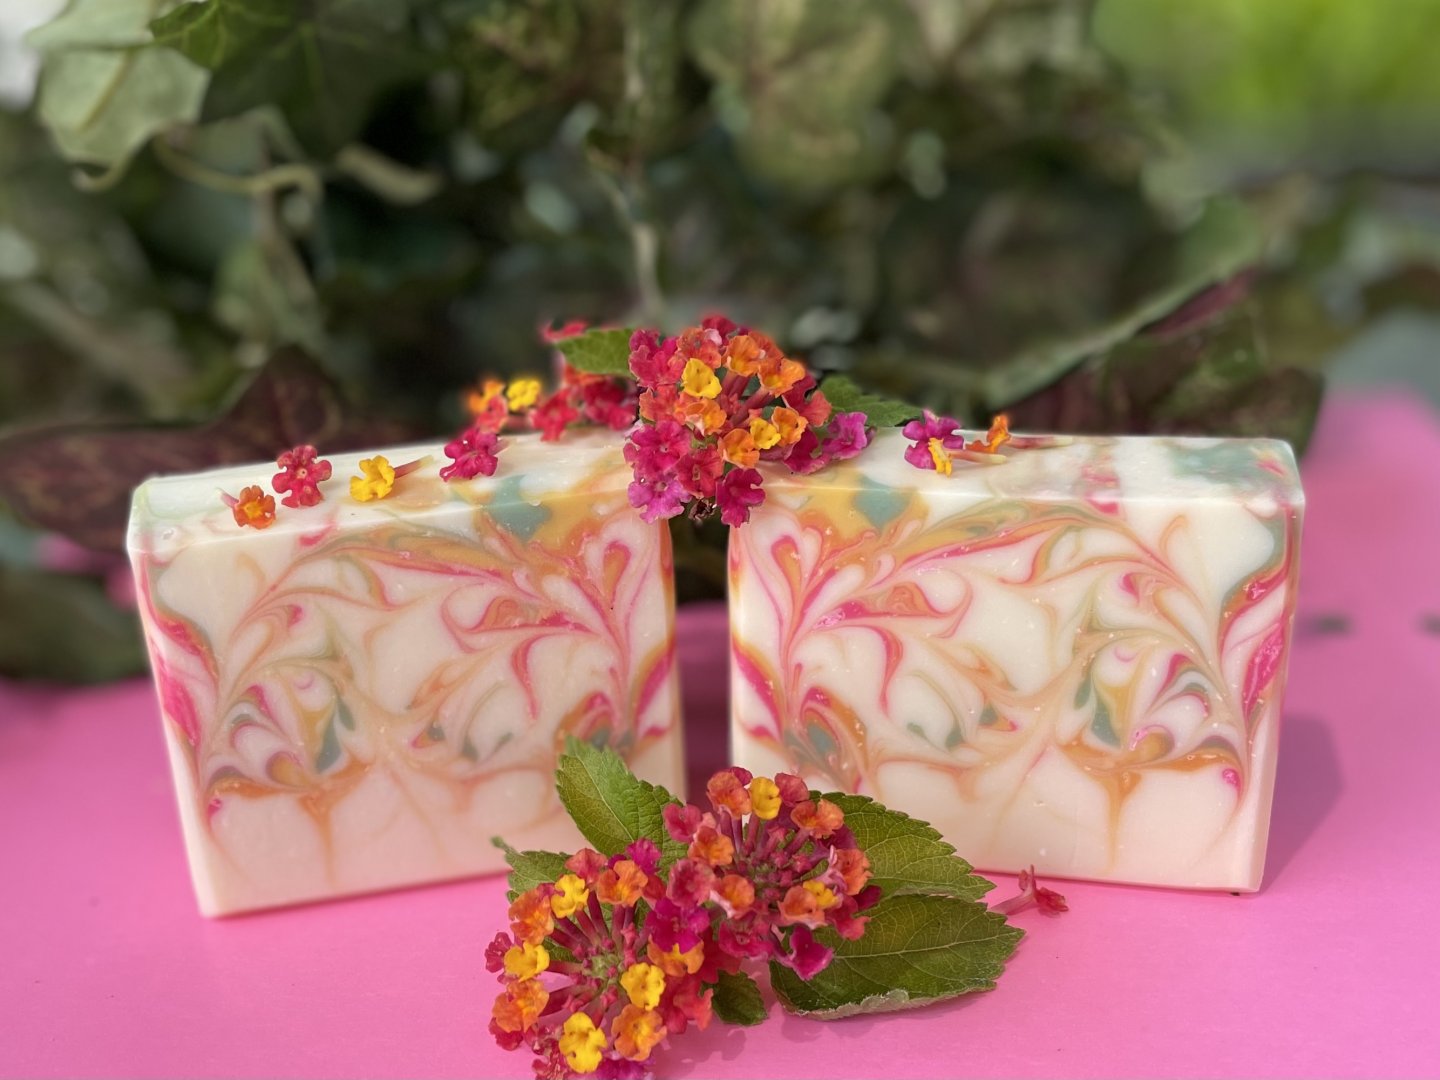 How to decorate soap? Flowers, herbs, decoupage